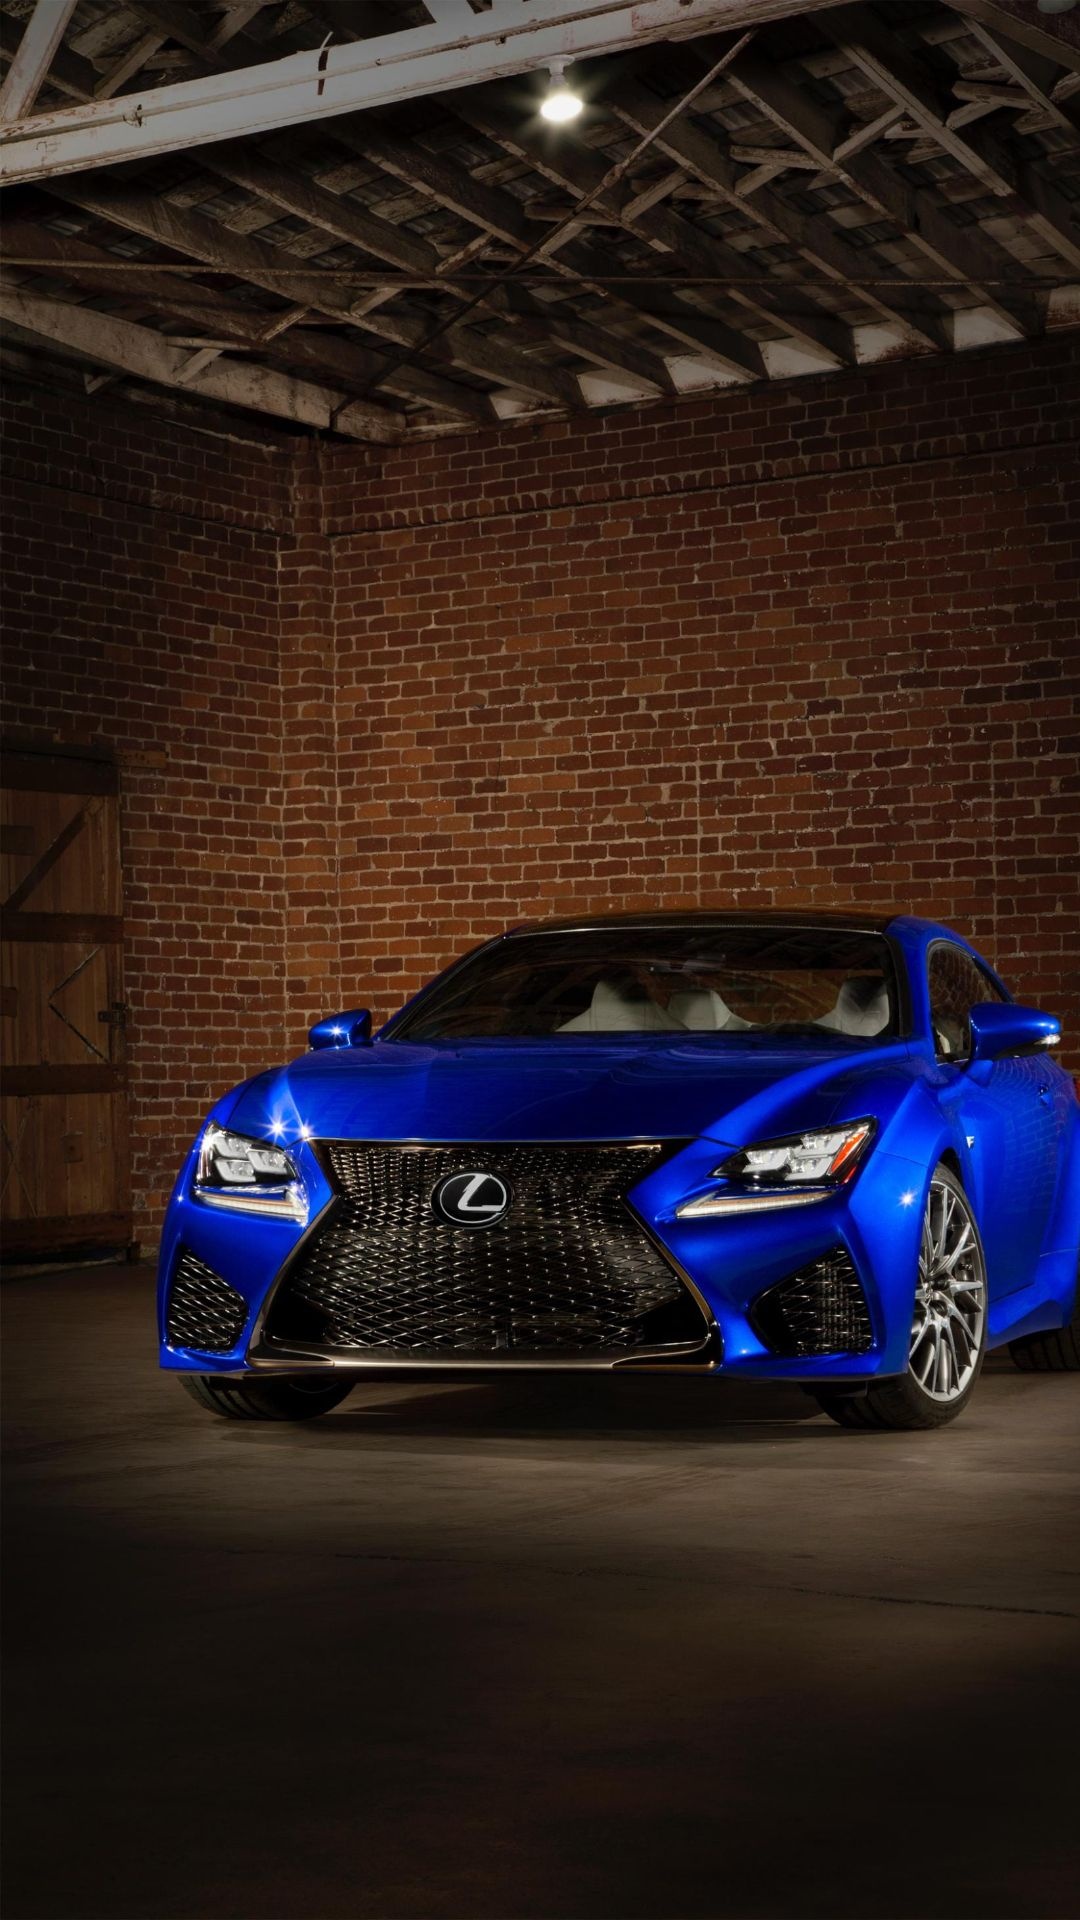 Lexus RC, Auto luxury, Top backgrounds, Stunning images, 1080x1920 Full HD Handy